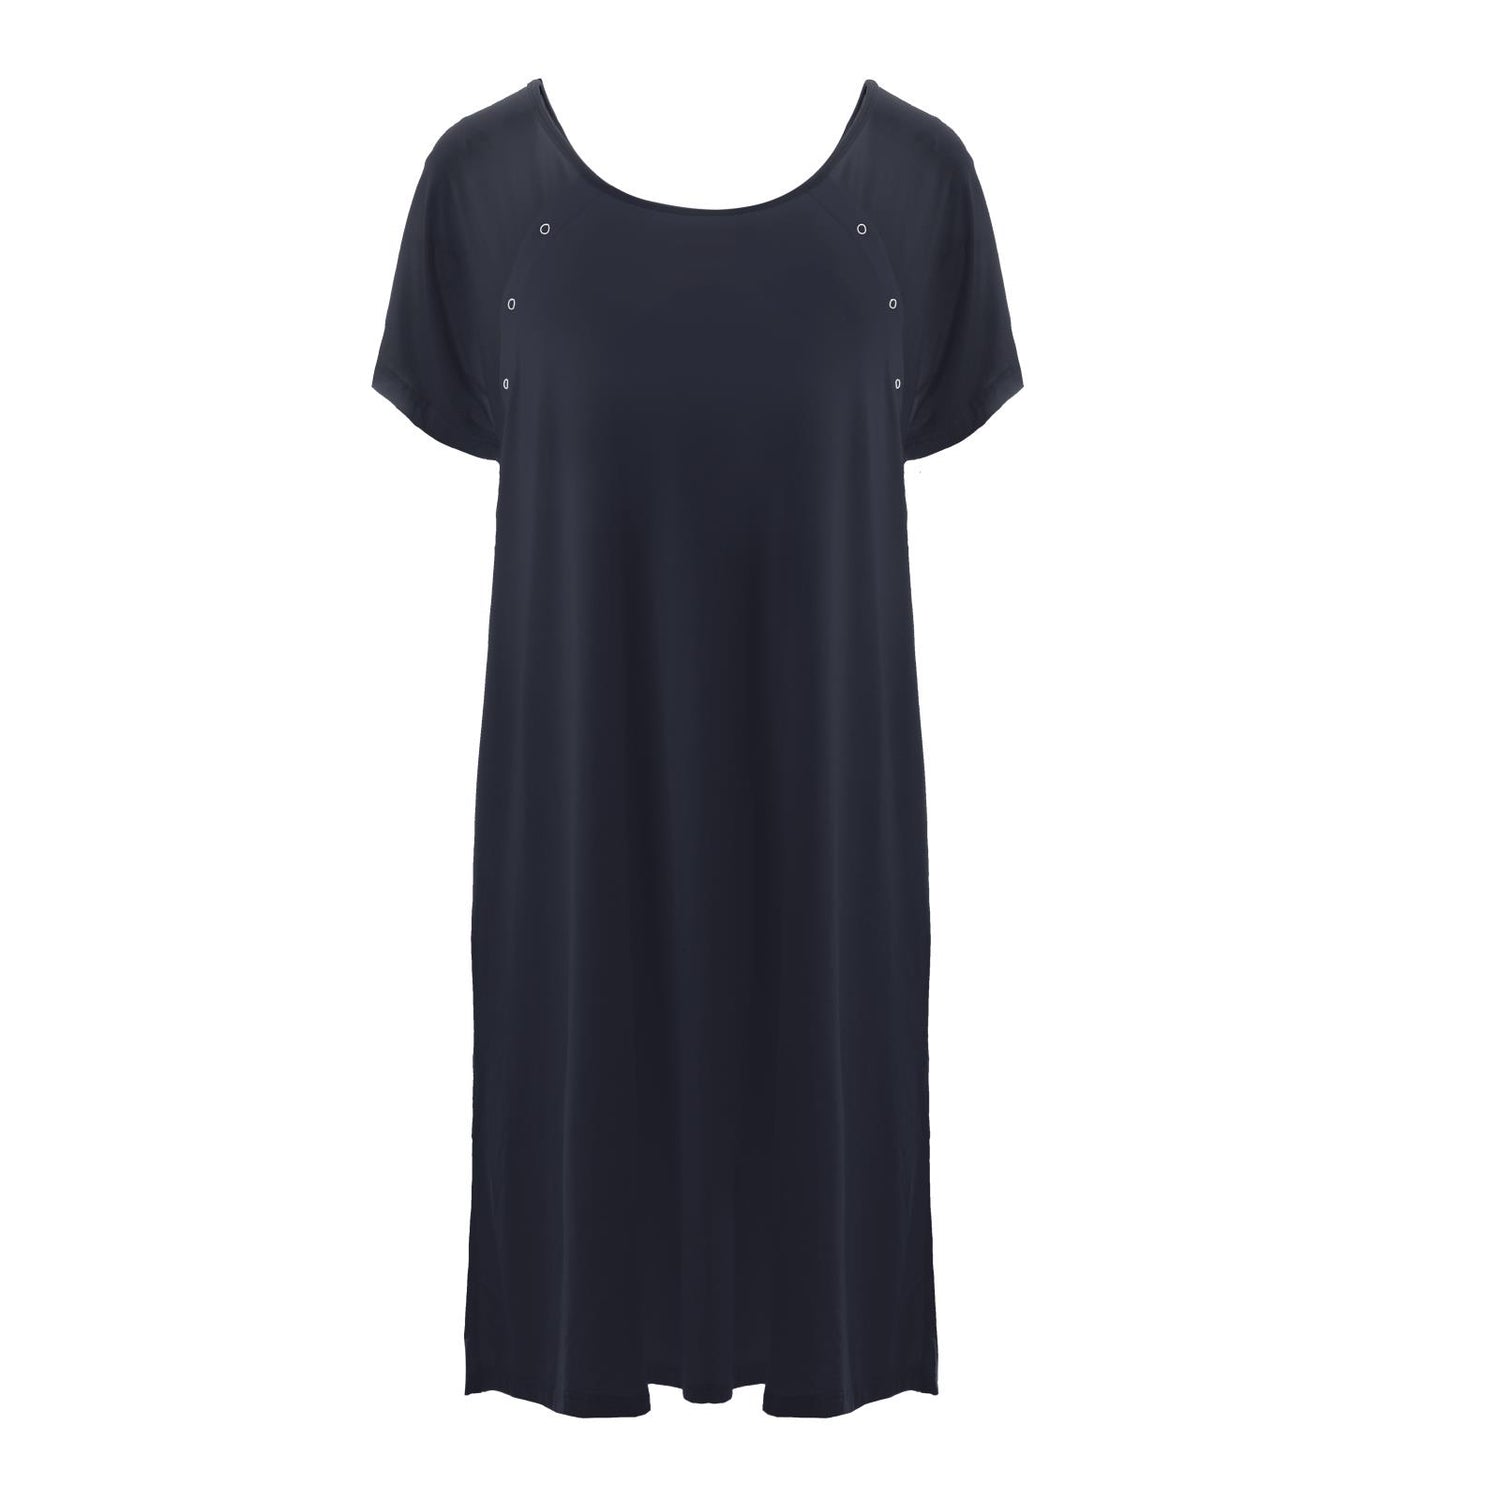 Women's Hospital Gown in Deep Space